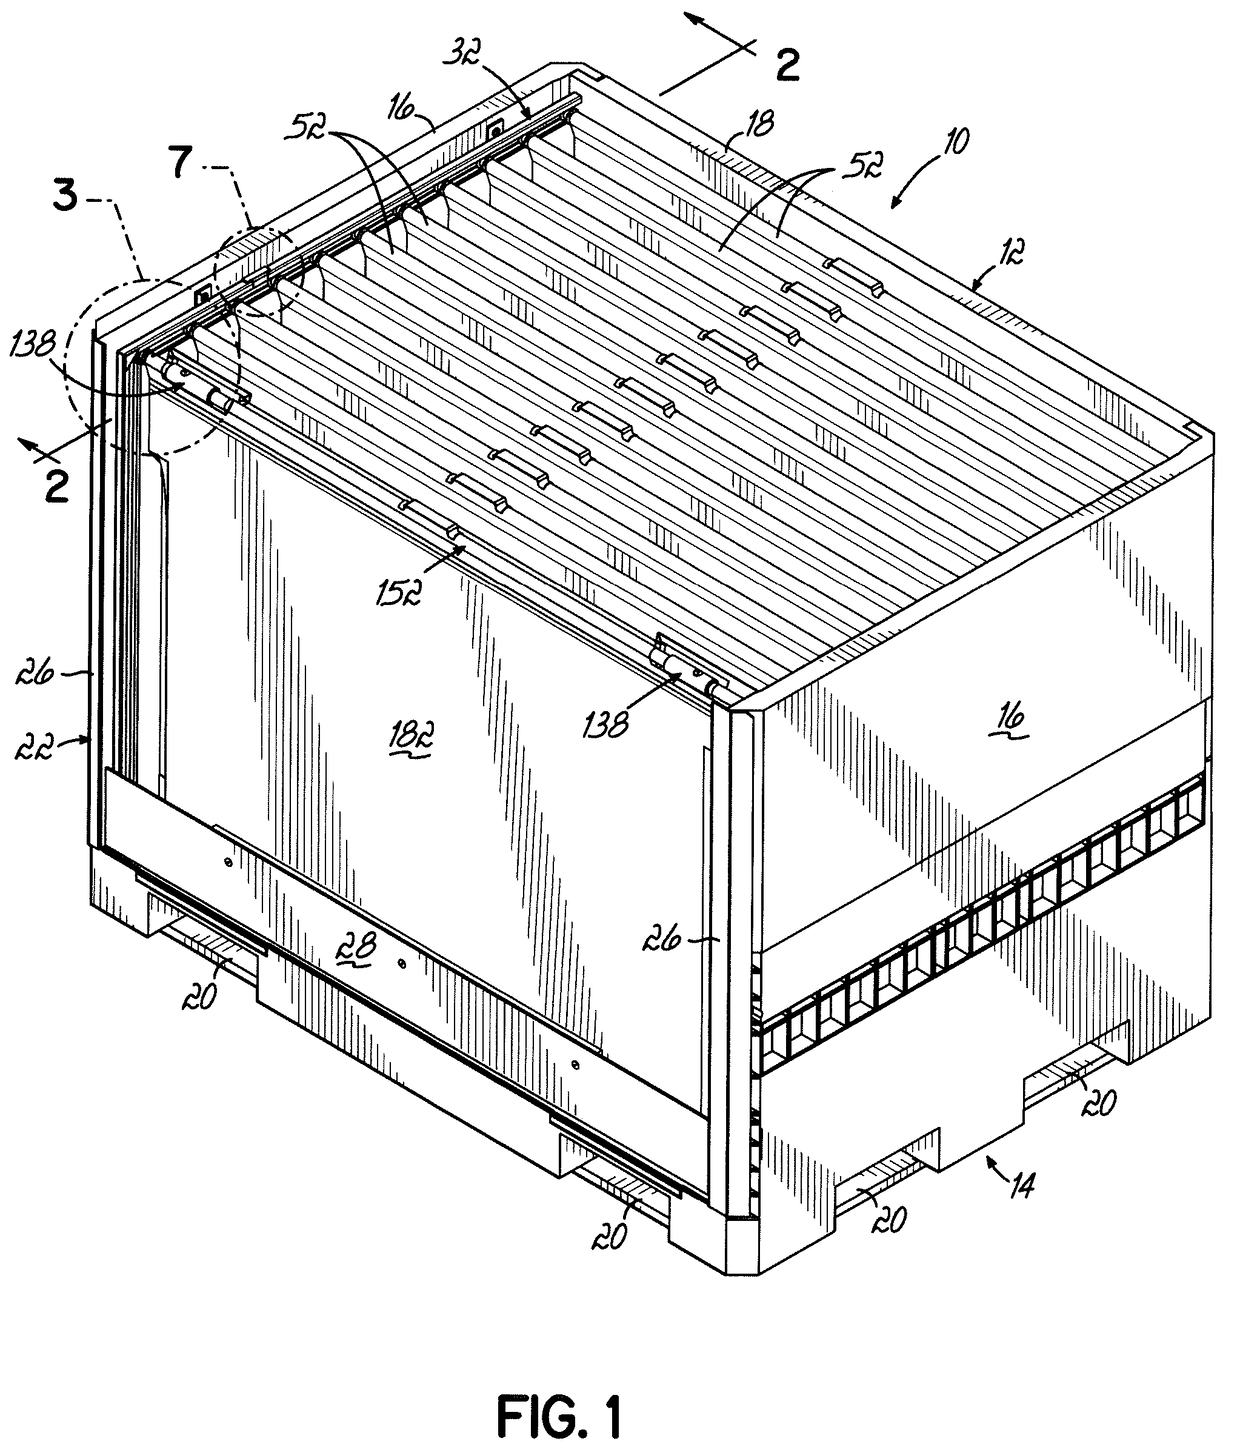 Container Having At Least One Lockable Crossbar Assembly Movable Along Tracks